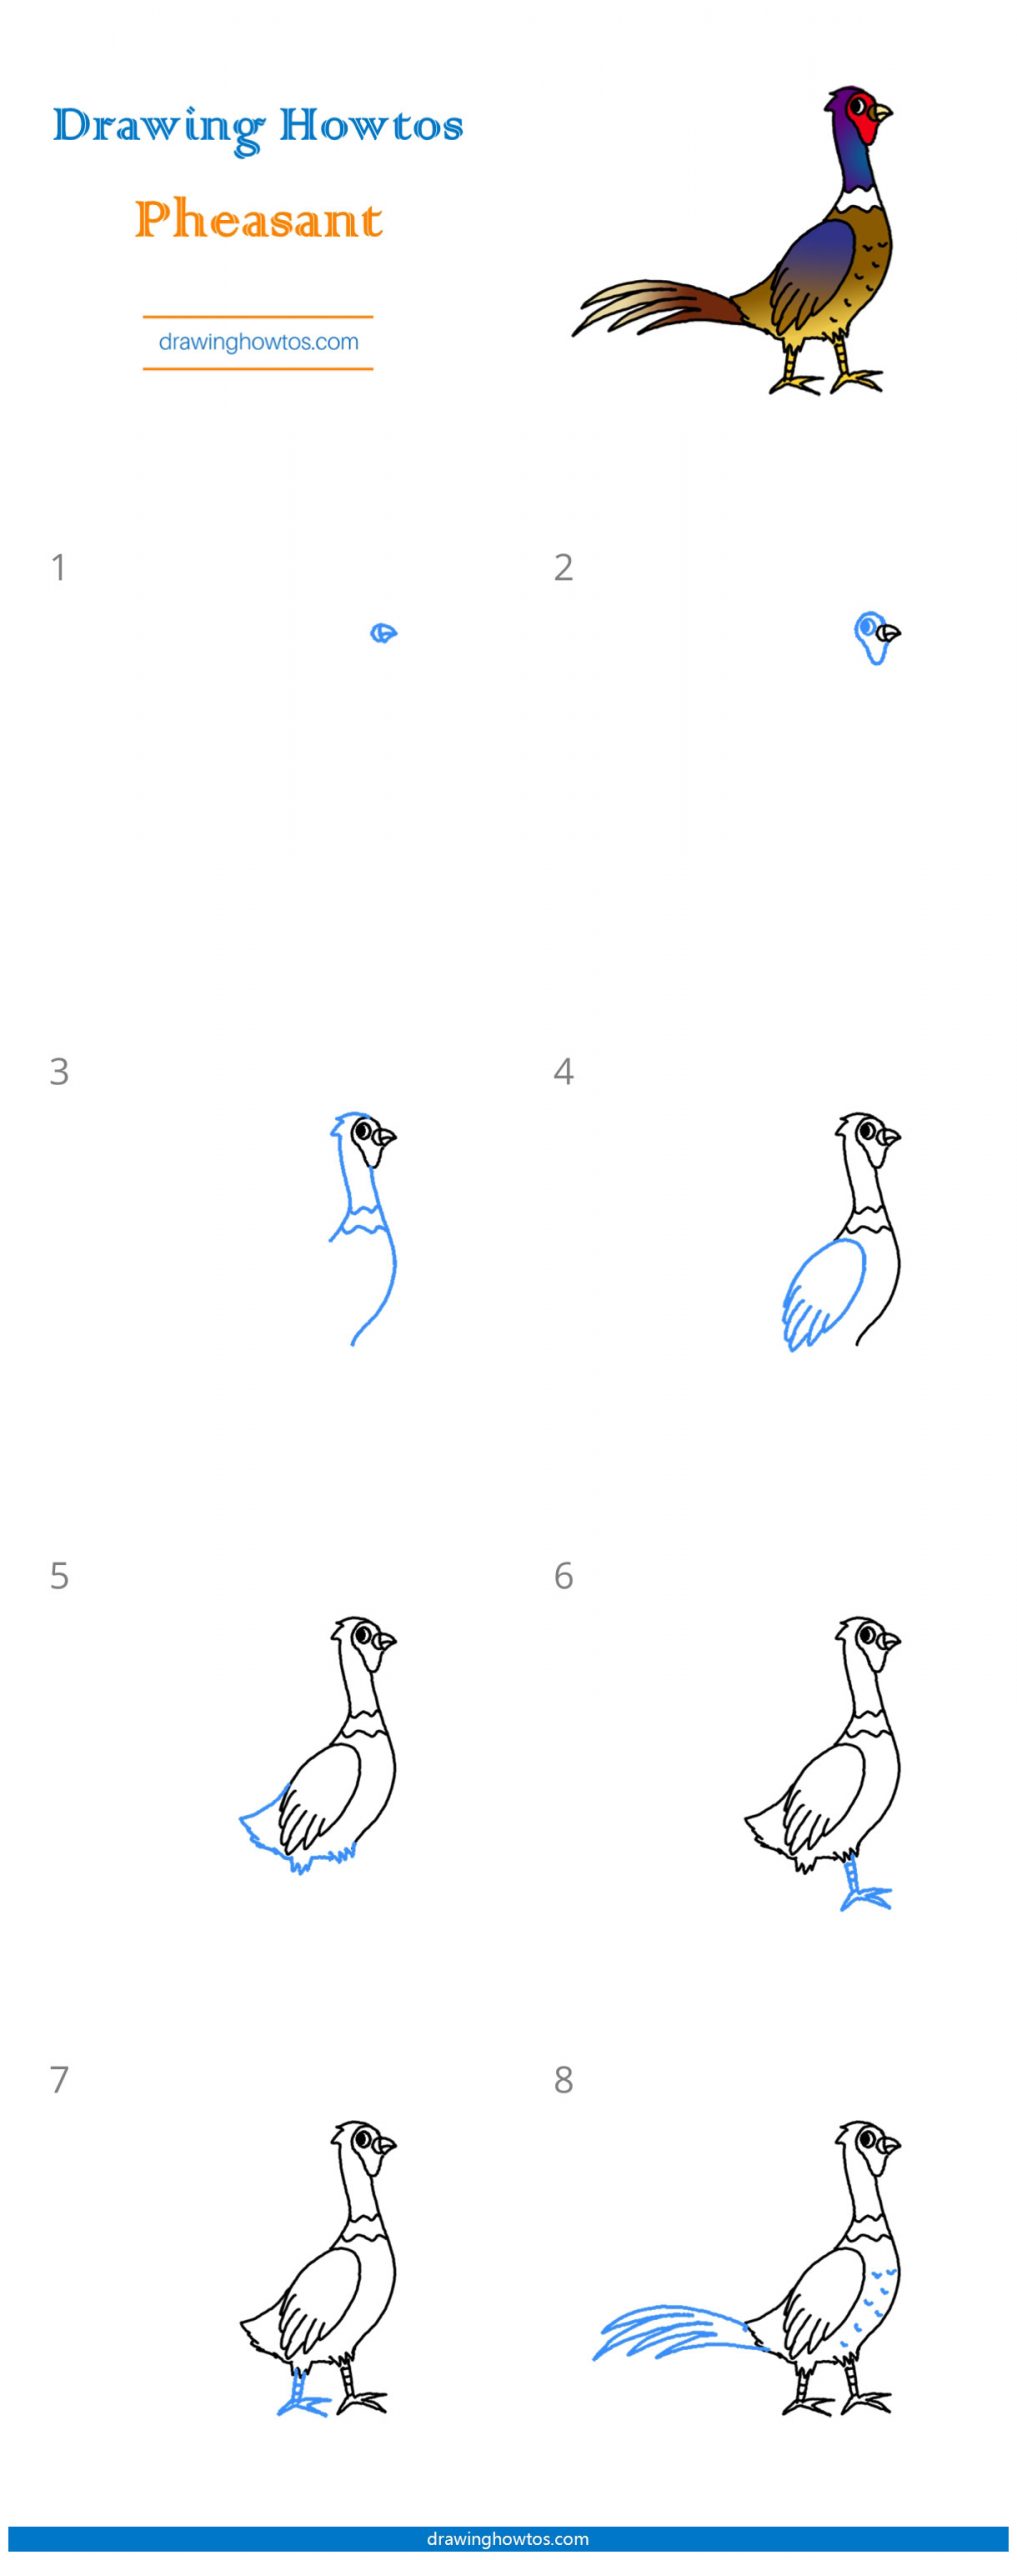 How to Draw a Pheasant - Step by Step Easy Drawing Guides - Drawing Howtos